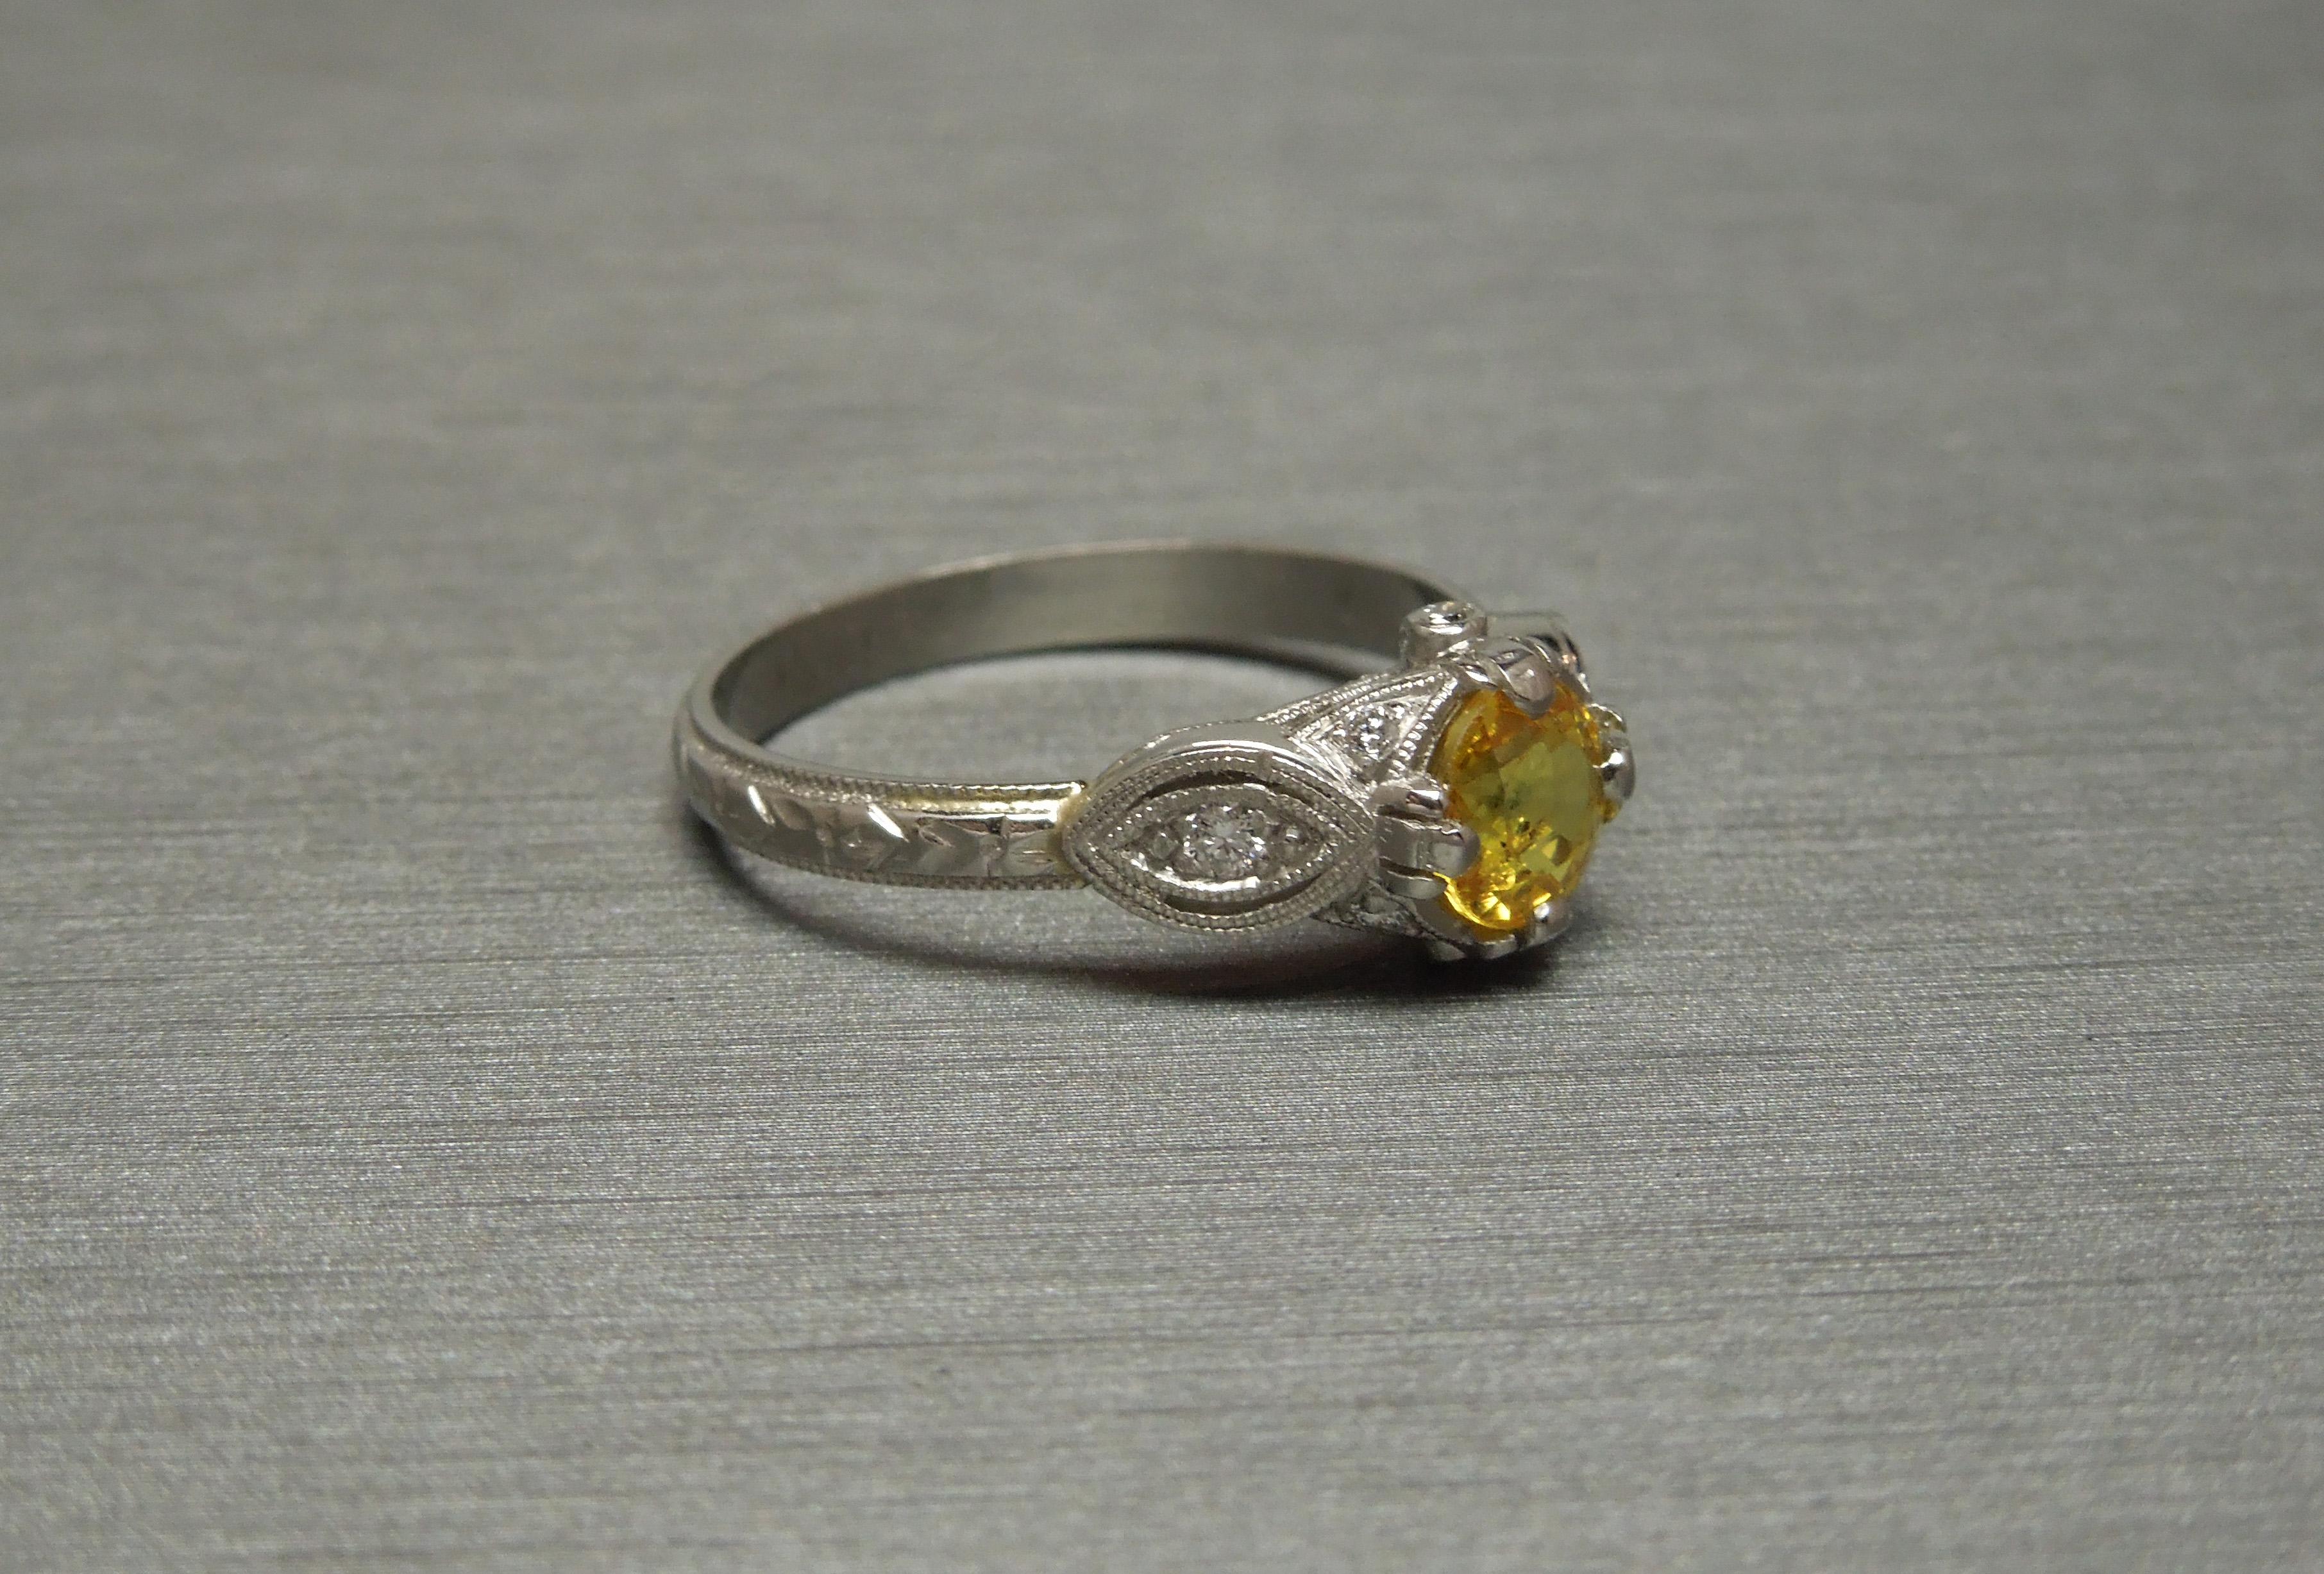 This Belle Époque Sapphire Ring features a central Round cut 1.10 carat Natural Canary Yellow Sapphire at 5.9mm in diameter, securely set in a 4-Prong setting. With a total of 8 Nearly Colorless Nearly Flawless Round Brilliant cut Accent Diamonds